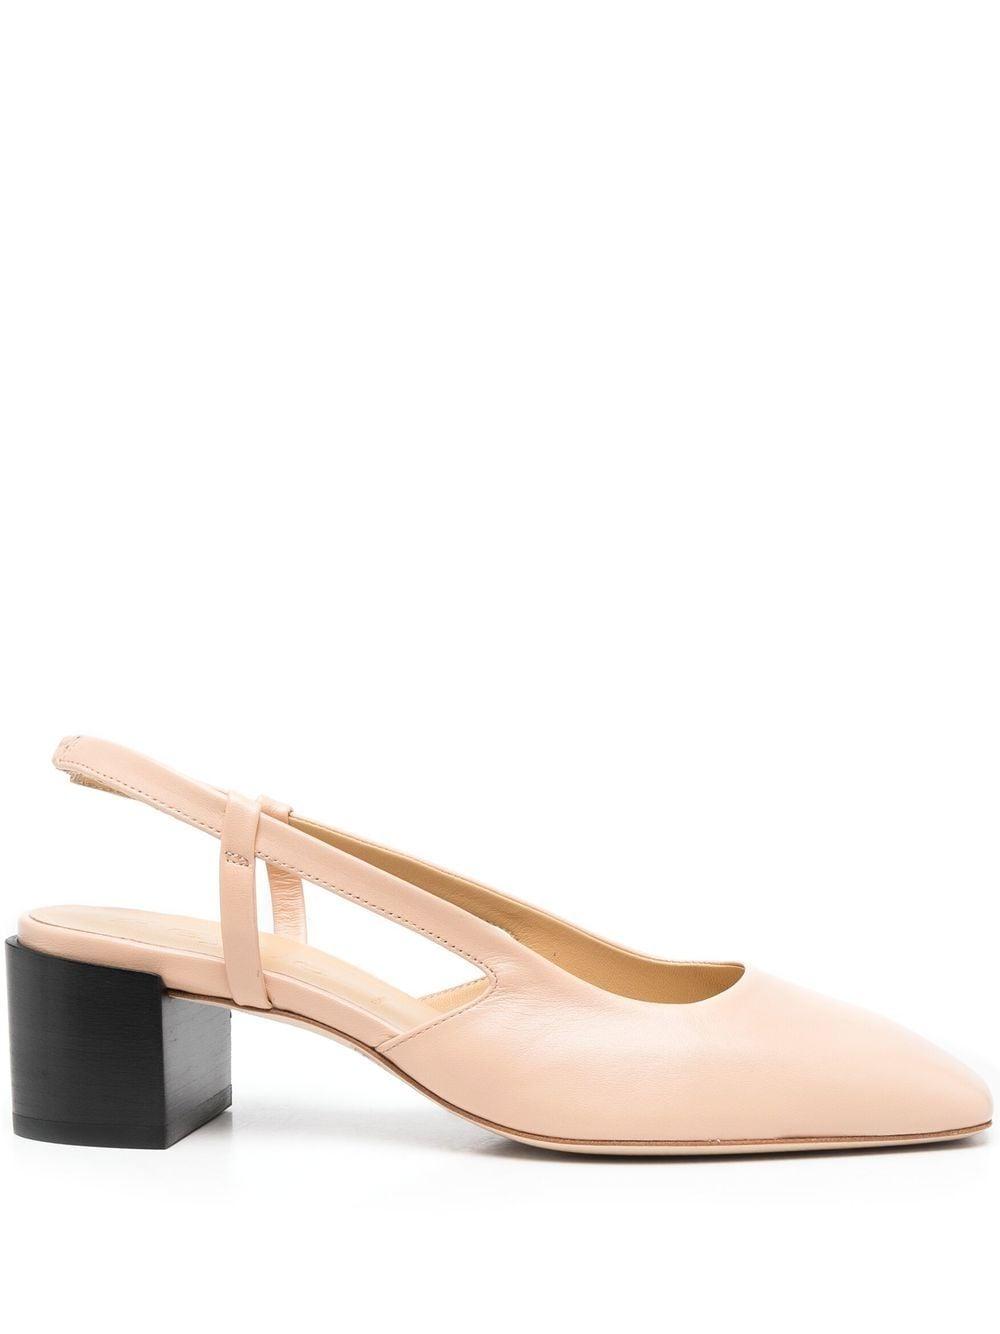 Aeyde Alicia 60mm Slingback Pumps | Lyst